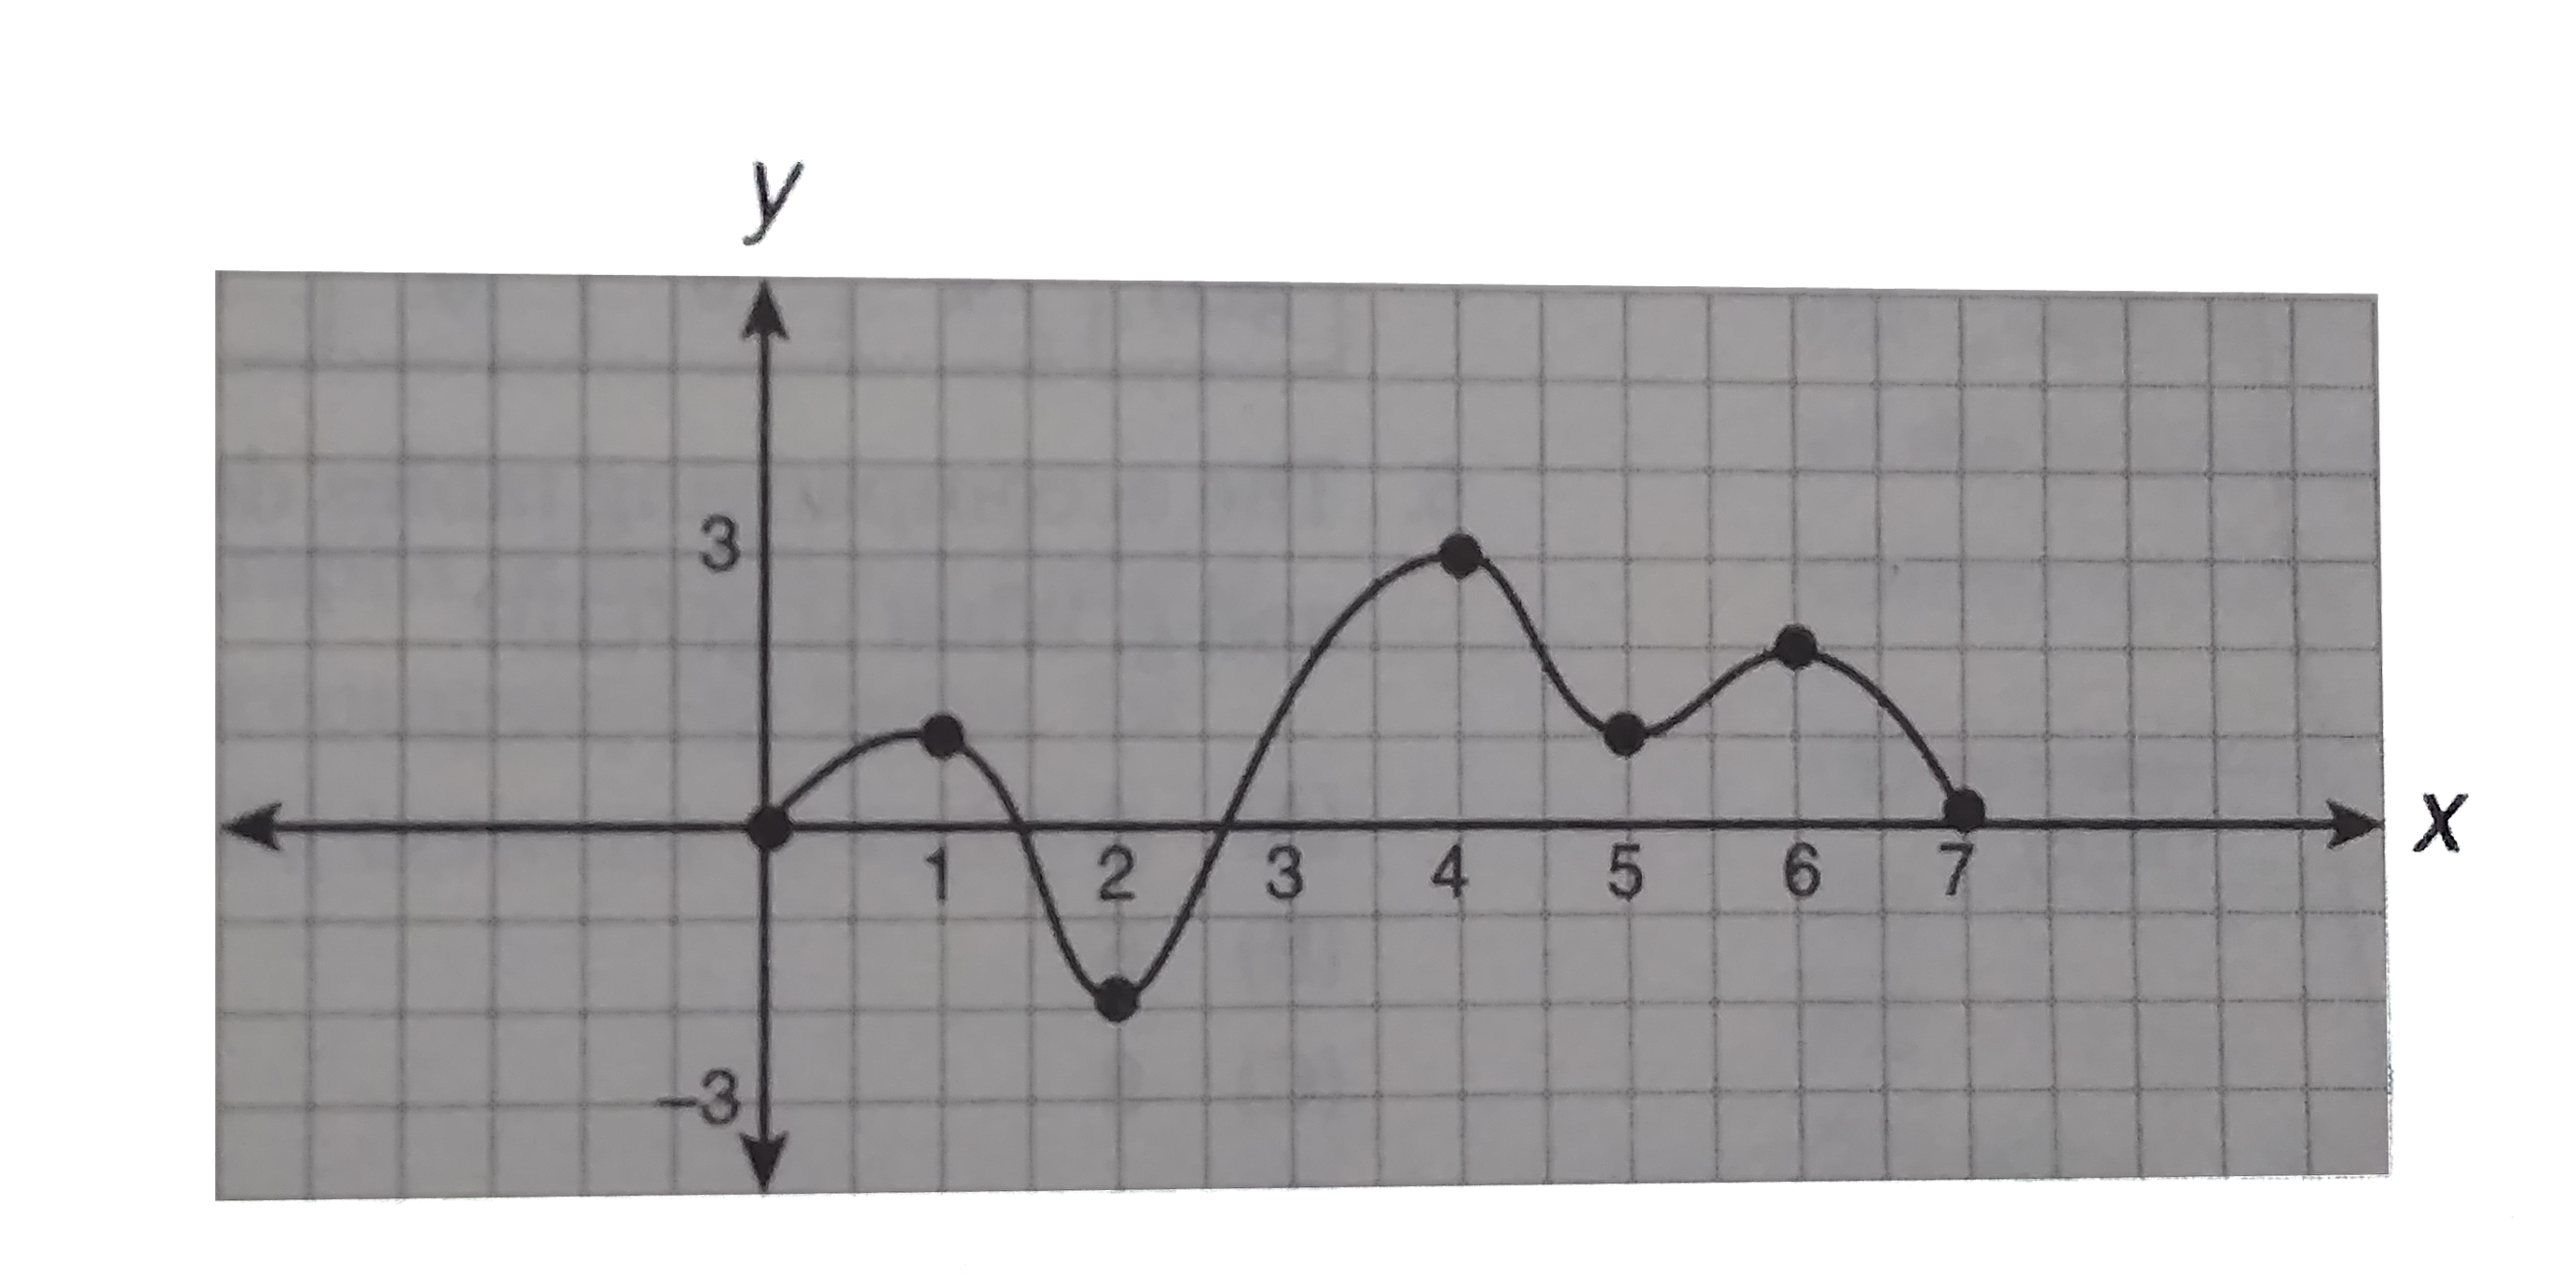 The graph above shows the function y=f(x) over the interval 0lexle7. What is the value of f(f(6))?